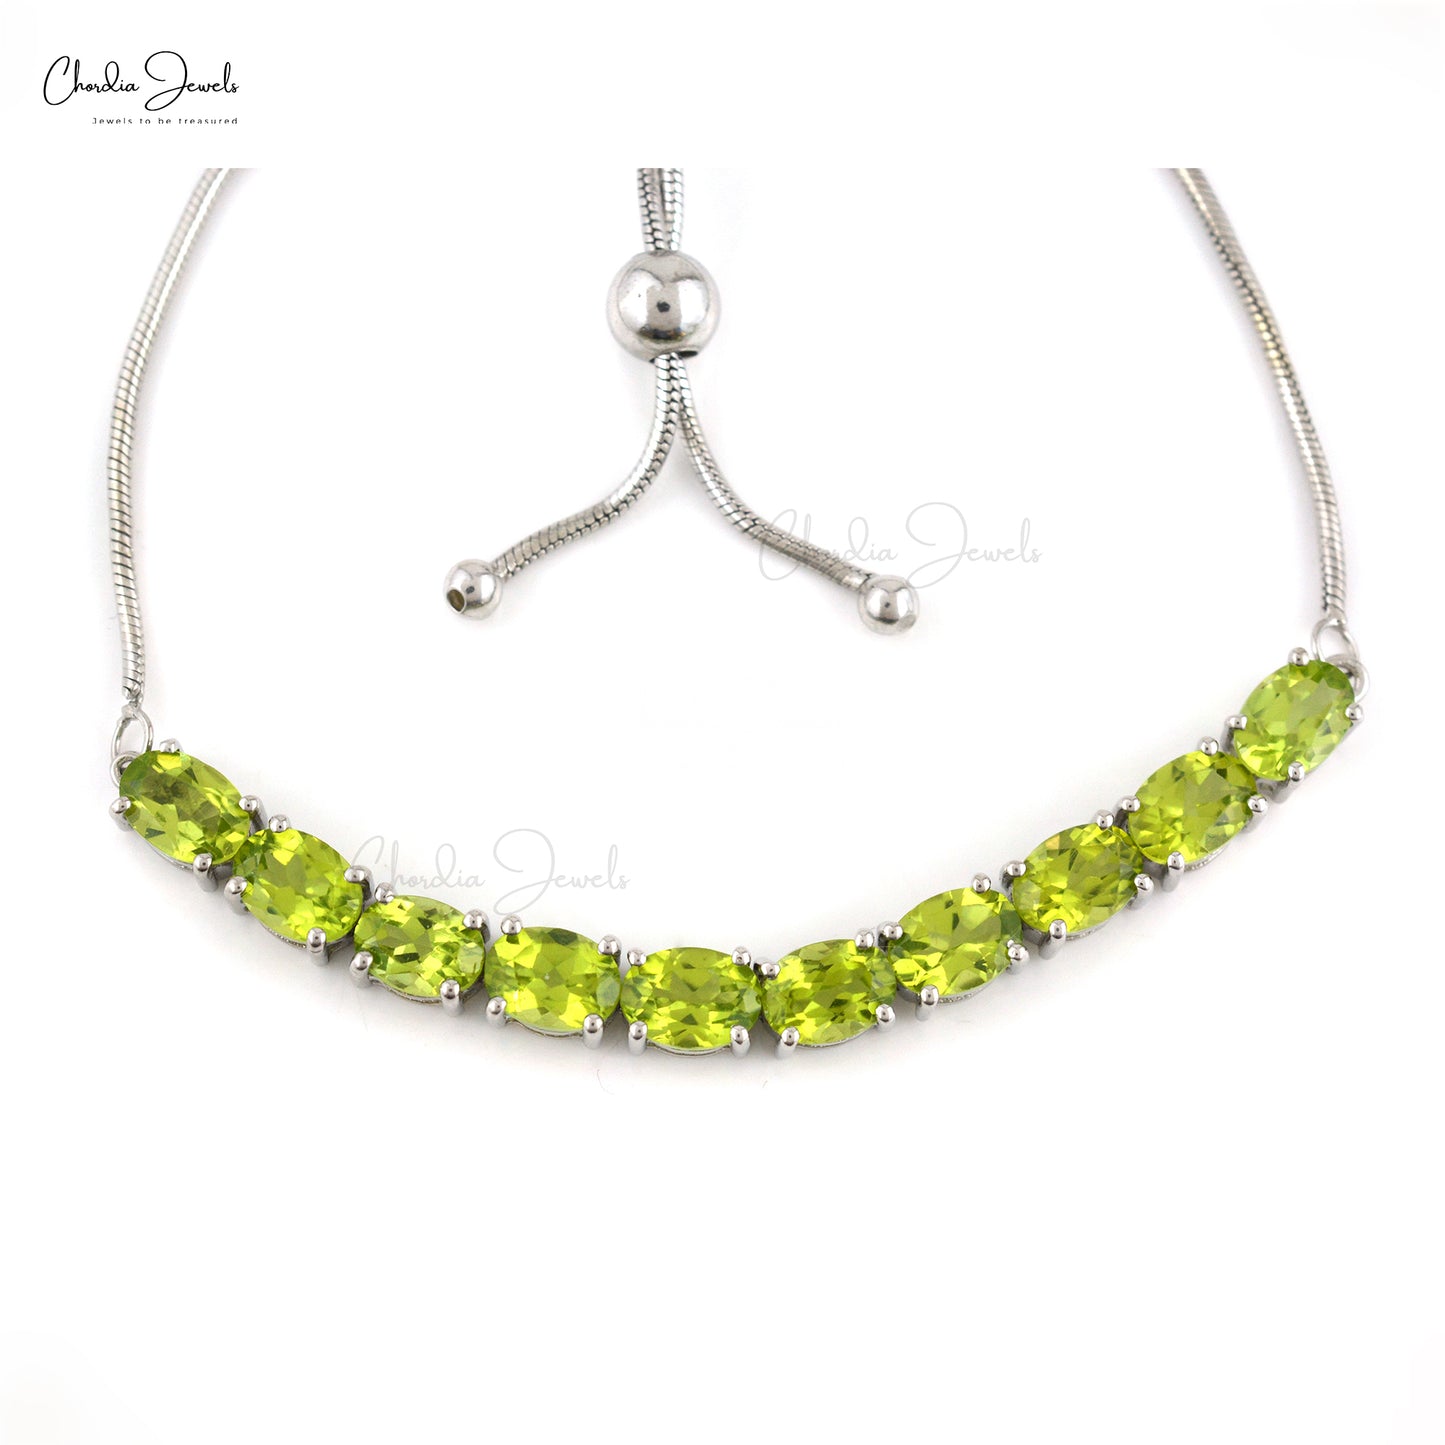 Load image into Gallery viewer, Top Manufacturer Authentic Peridot Bracelet 925 Sterling Oval Cut Gemstone Sliver Jewelry August Birthstone Jewelry At Offer Price
